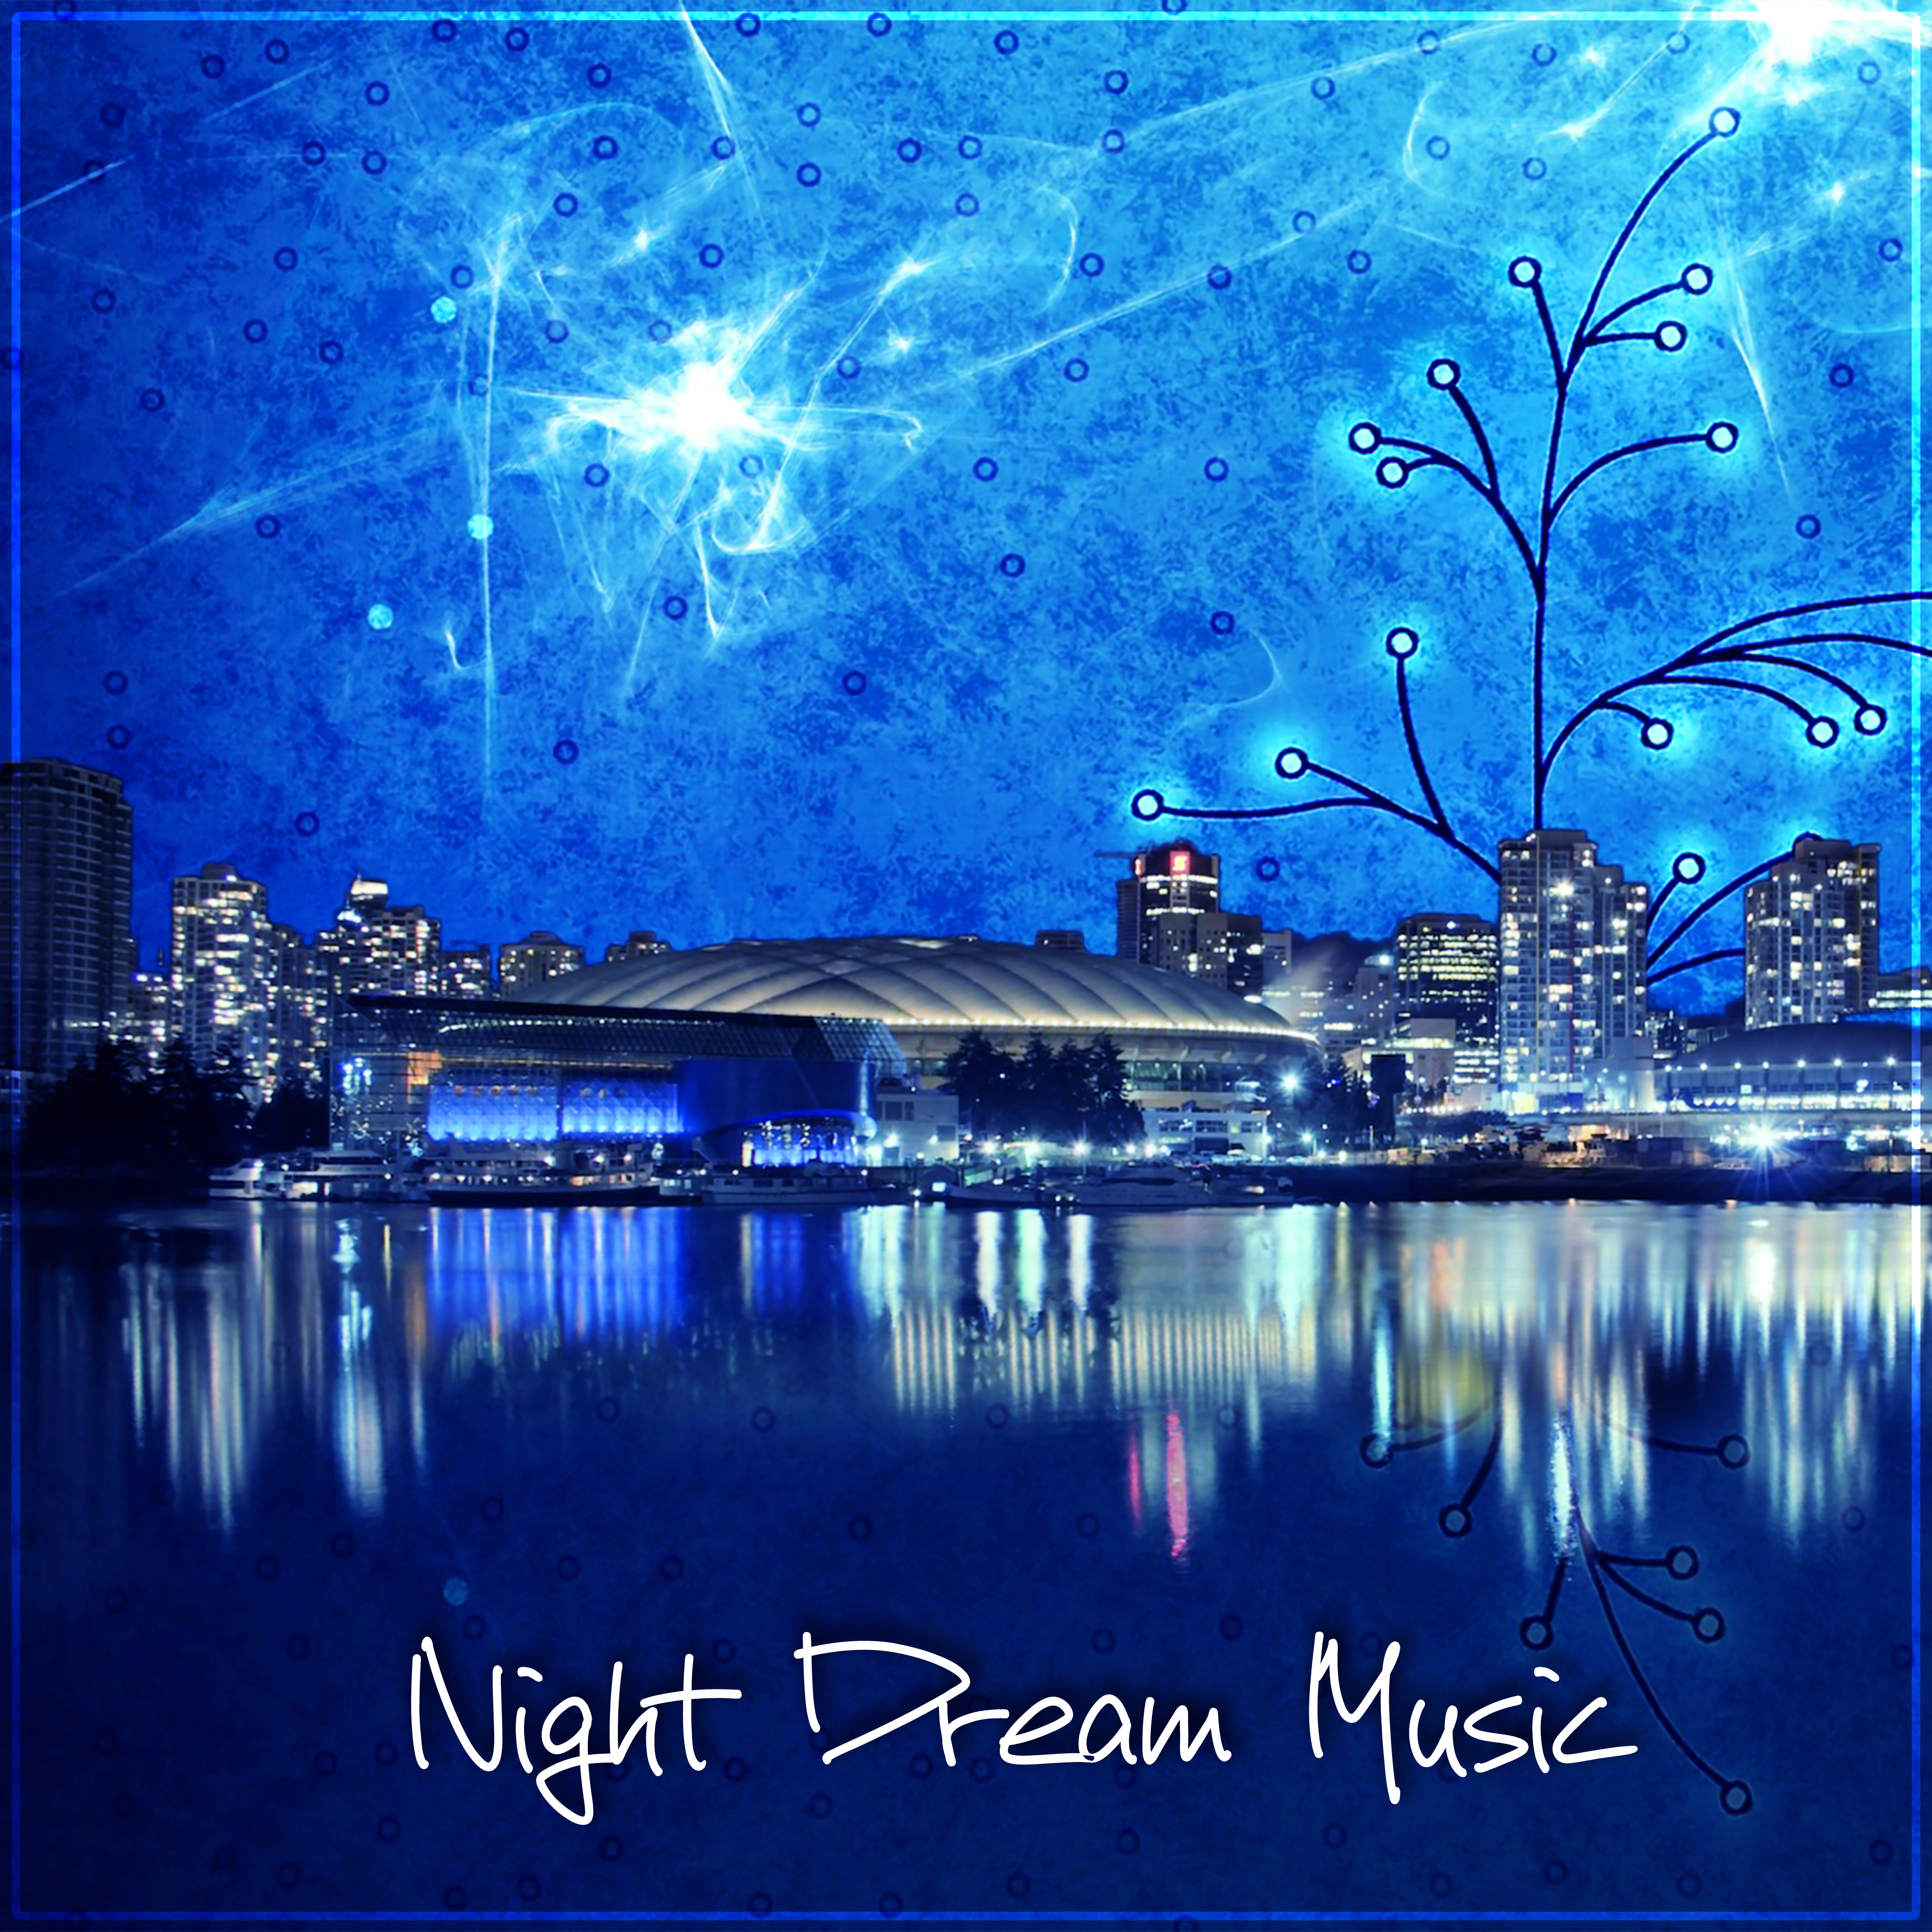 Night Dream Music - Honeymoon with Smooth Jazz, Ultimate Collection for Tantric *********, Sensual Massage, Beautiful Songs for Intimate Moments, Piano Jazz